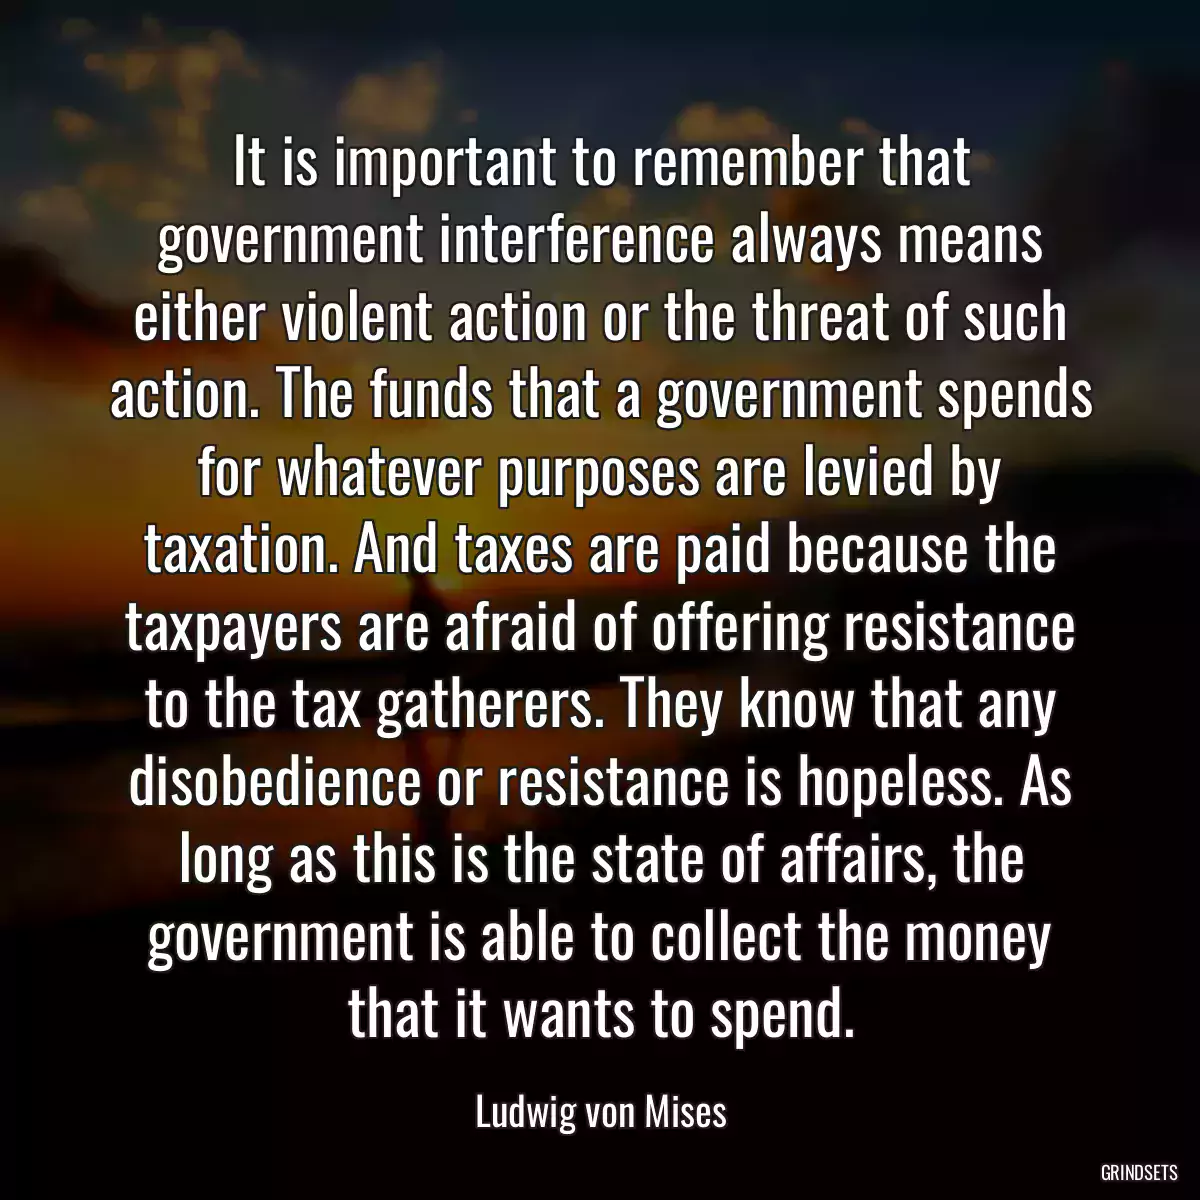 It is important to remember that government interference always means either violent action or the threat of such action. The funds that a government spends for whatever purposes are levied by taxation. And taxes are paid because the taxpayers are afraid of offering resistance to the tax gatherers. They know that any disobedience or resistance is hopeless. As long as this is the state of affairs, the government is able to collect the money that it wants to spend.